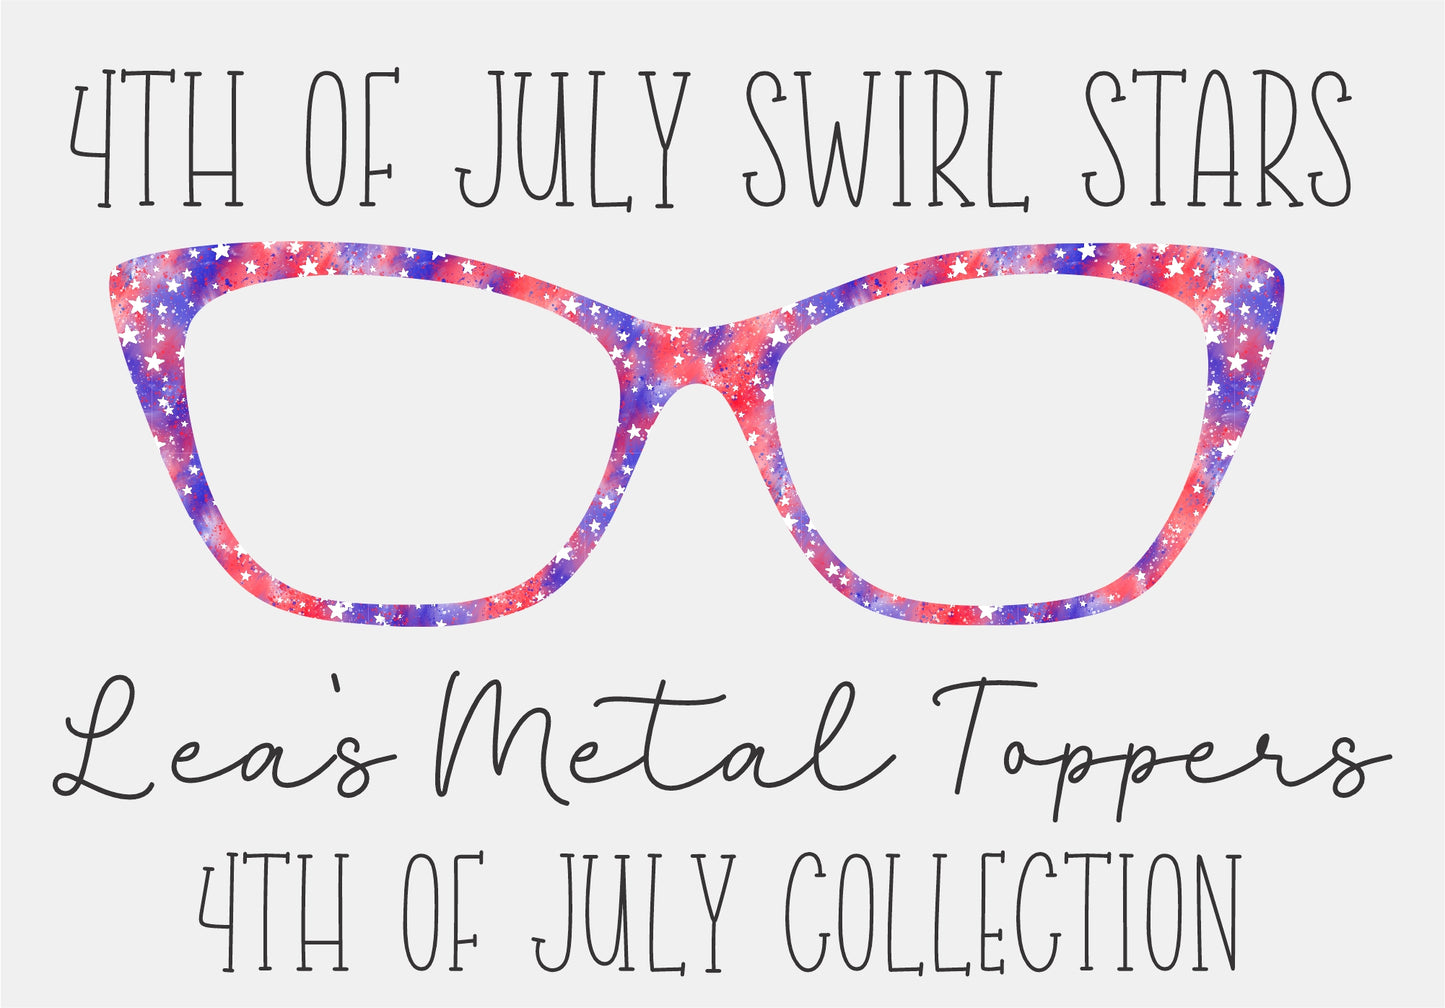 4TH OF JULY SWIRL STARS Eyewear Frame Toppers COMES WITH MAGNETS